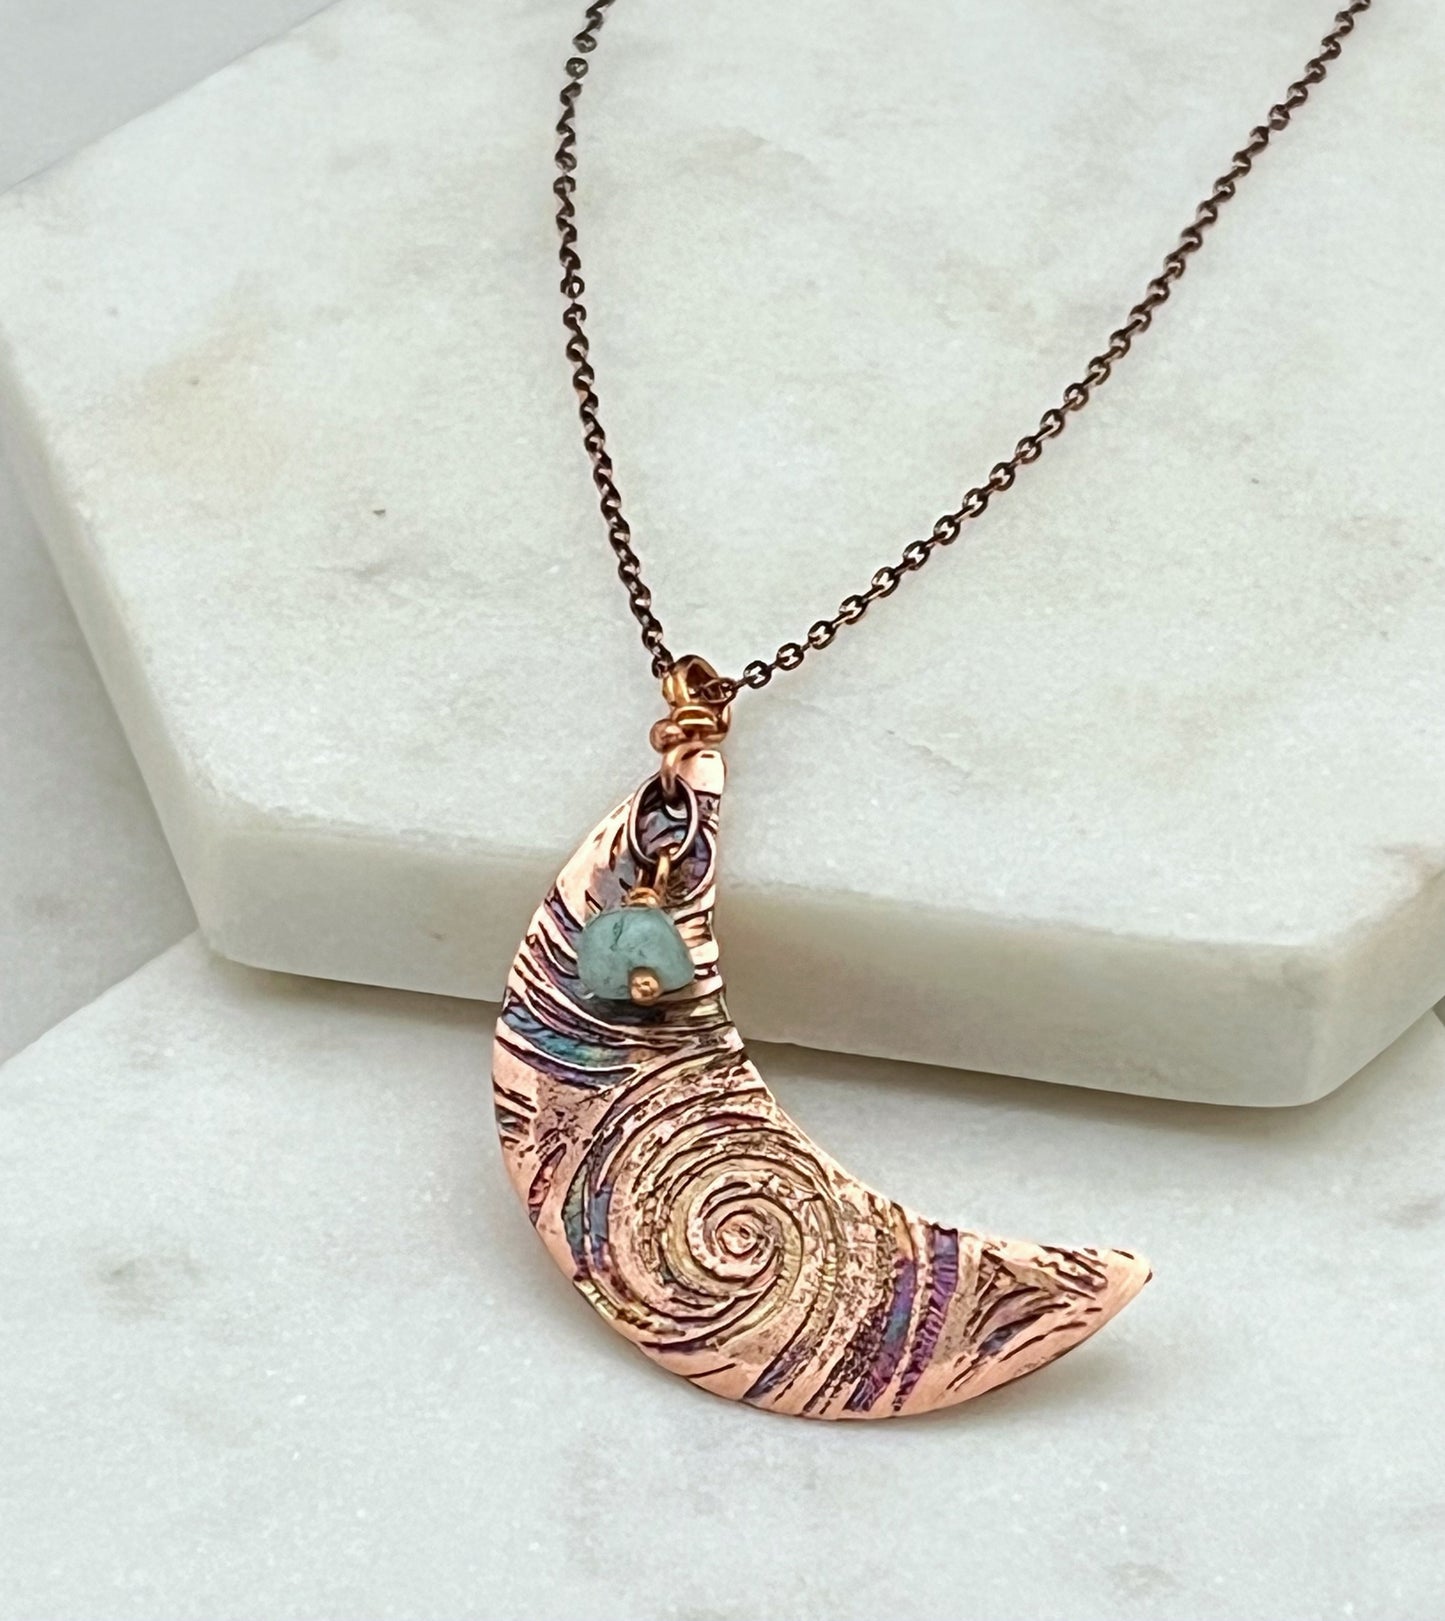 Acid etched copper crescent necklace with fire agate gemstone